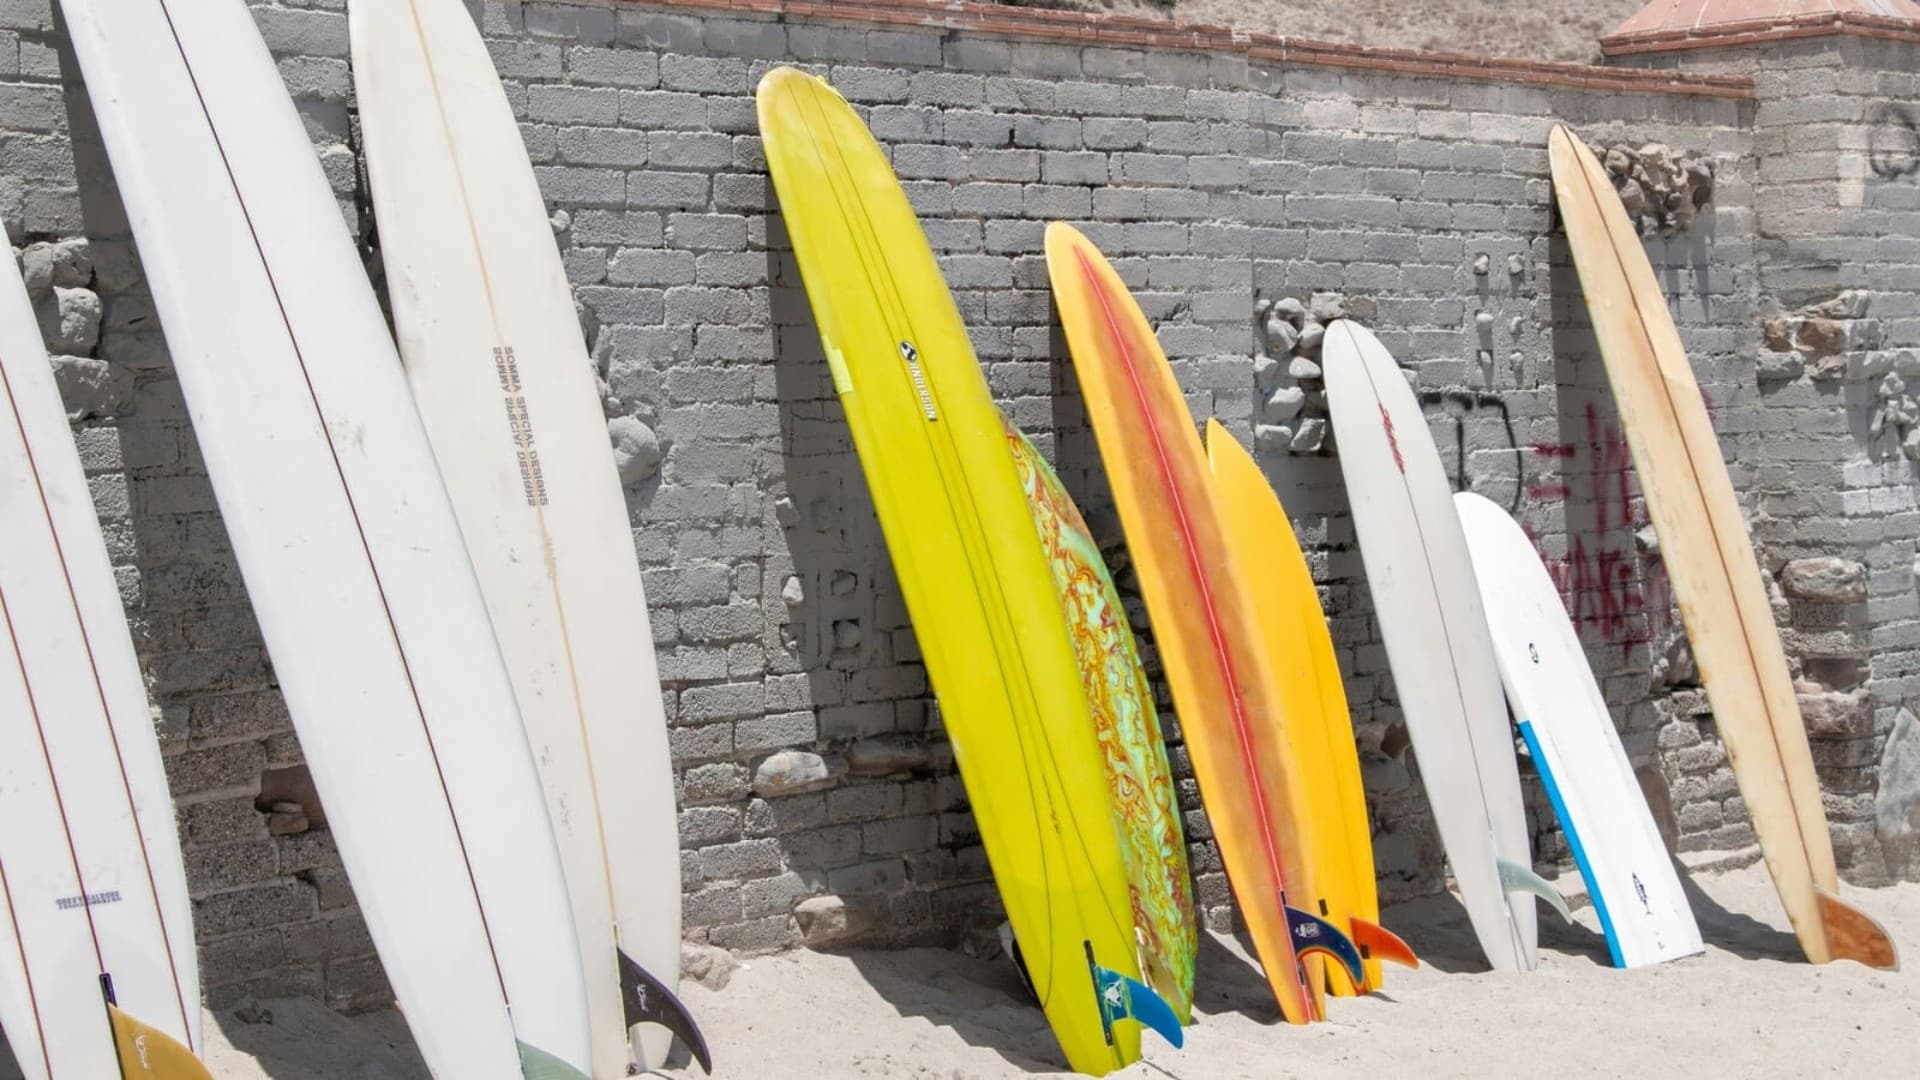 An image of a collection of surfboards